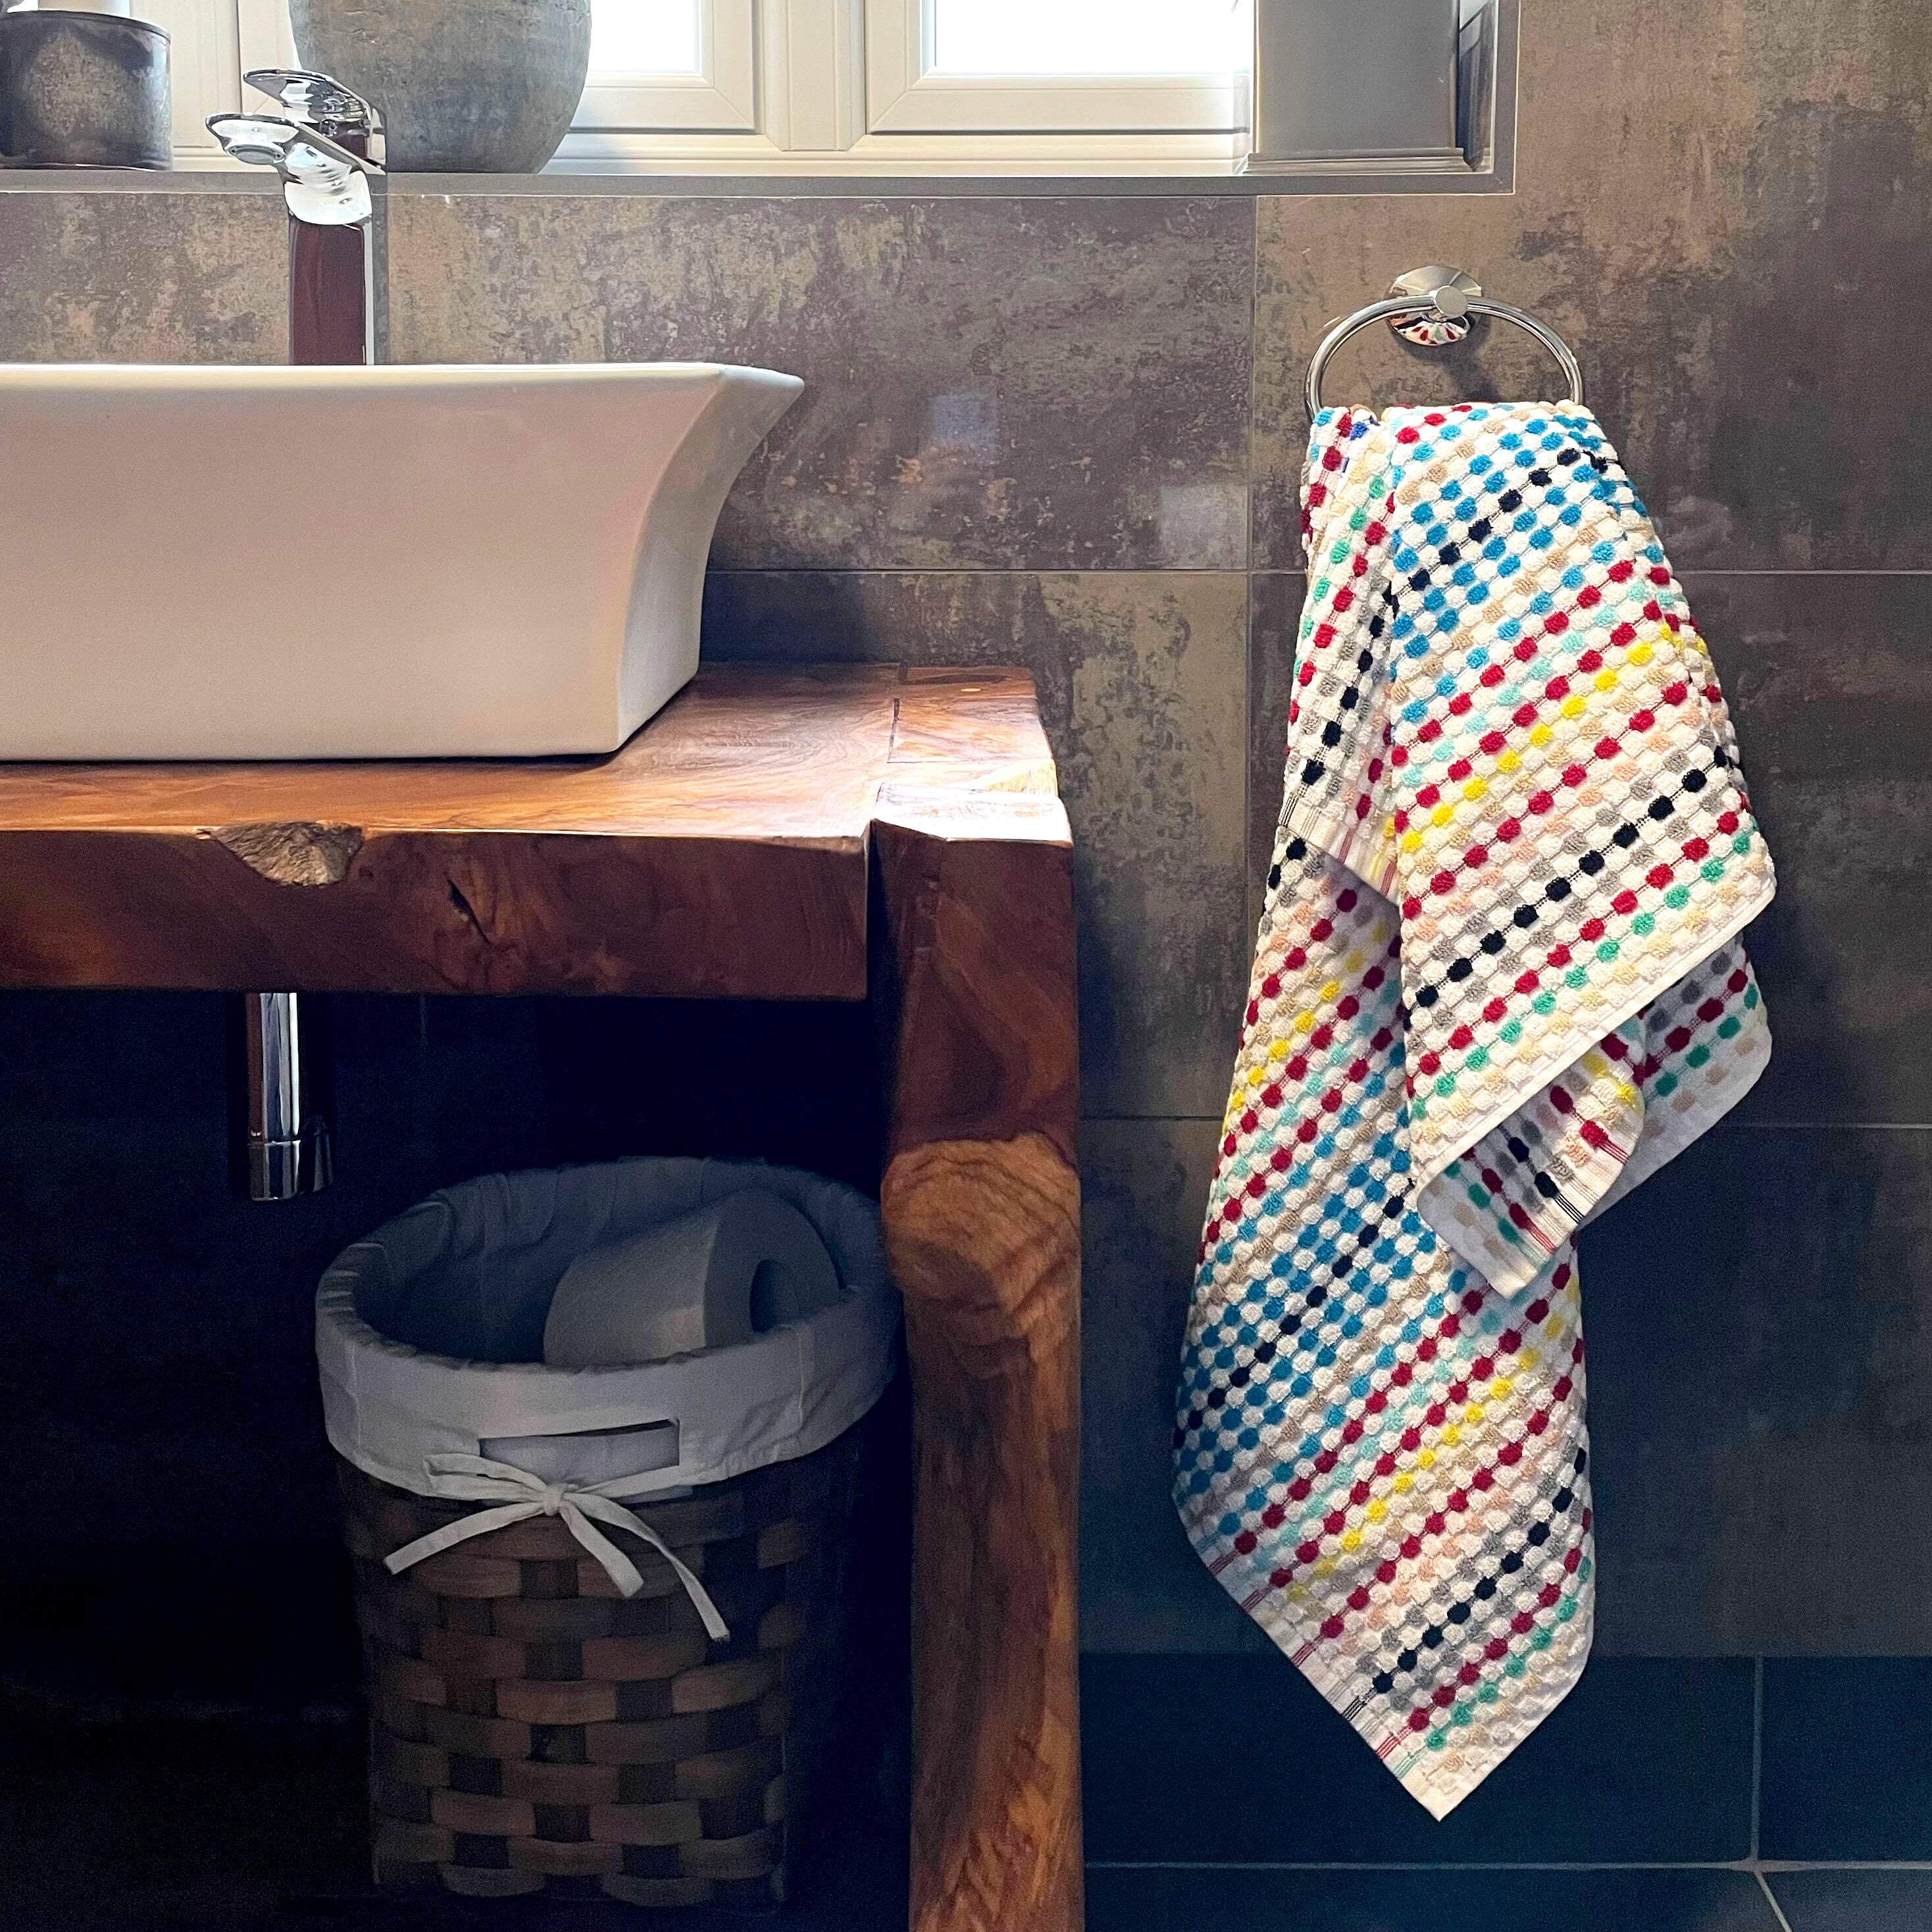 Remnant Recycled Cotton Towels - Light Bright Colourful Bathroom Towels